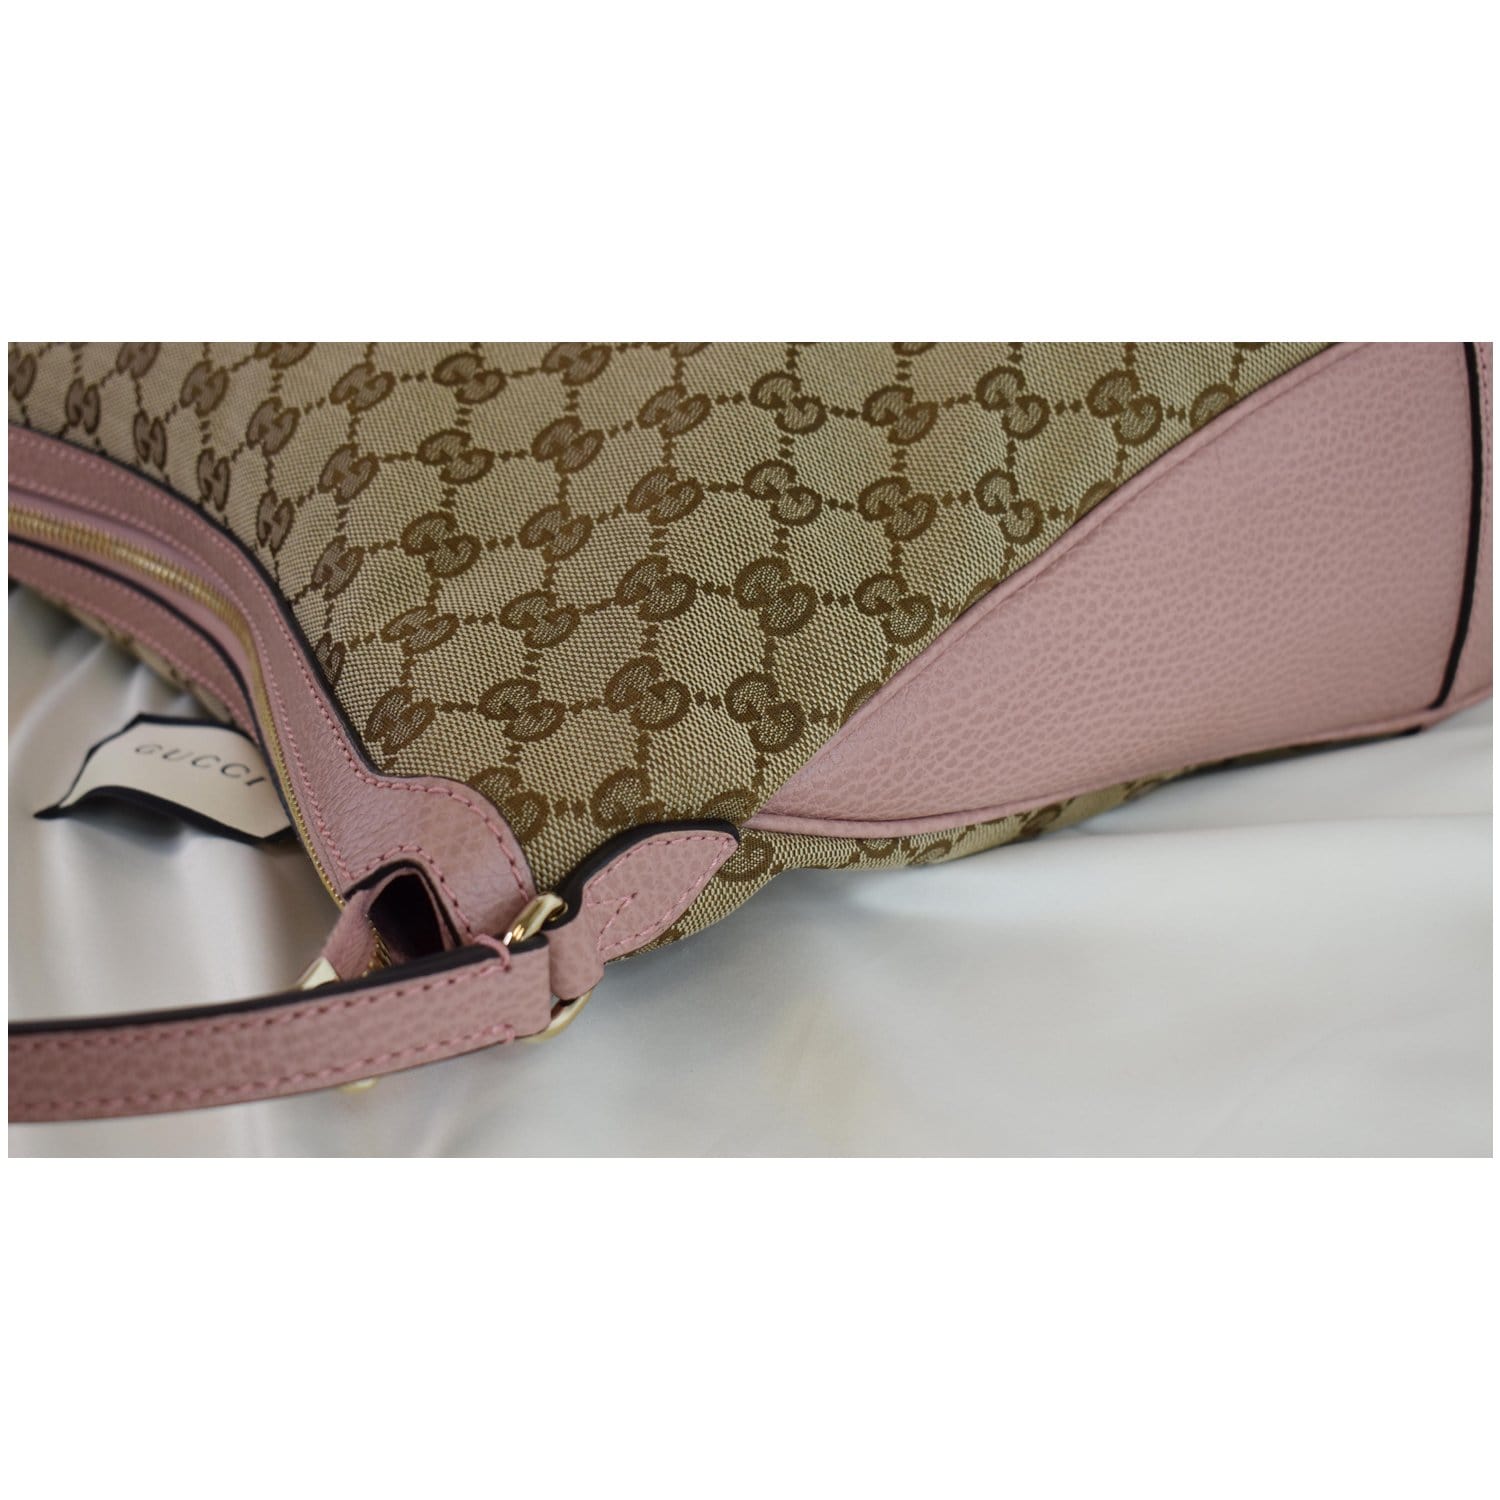 GUCCI Large Bree GG Canvas Hobo Bag Pink 449244